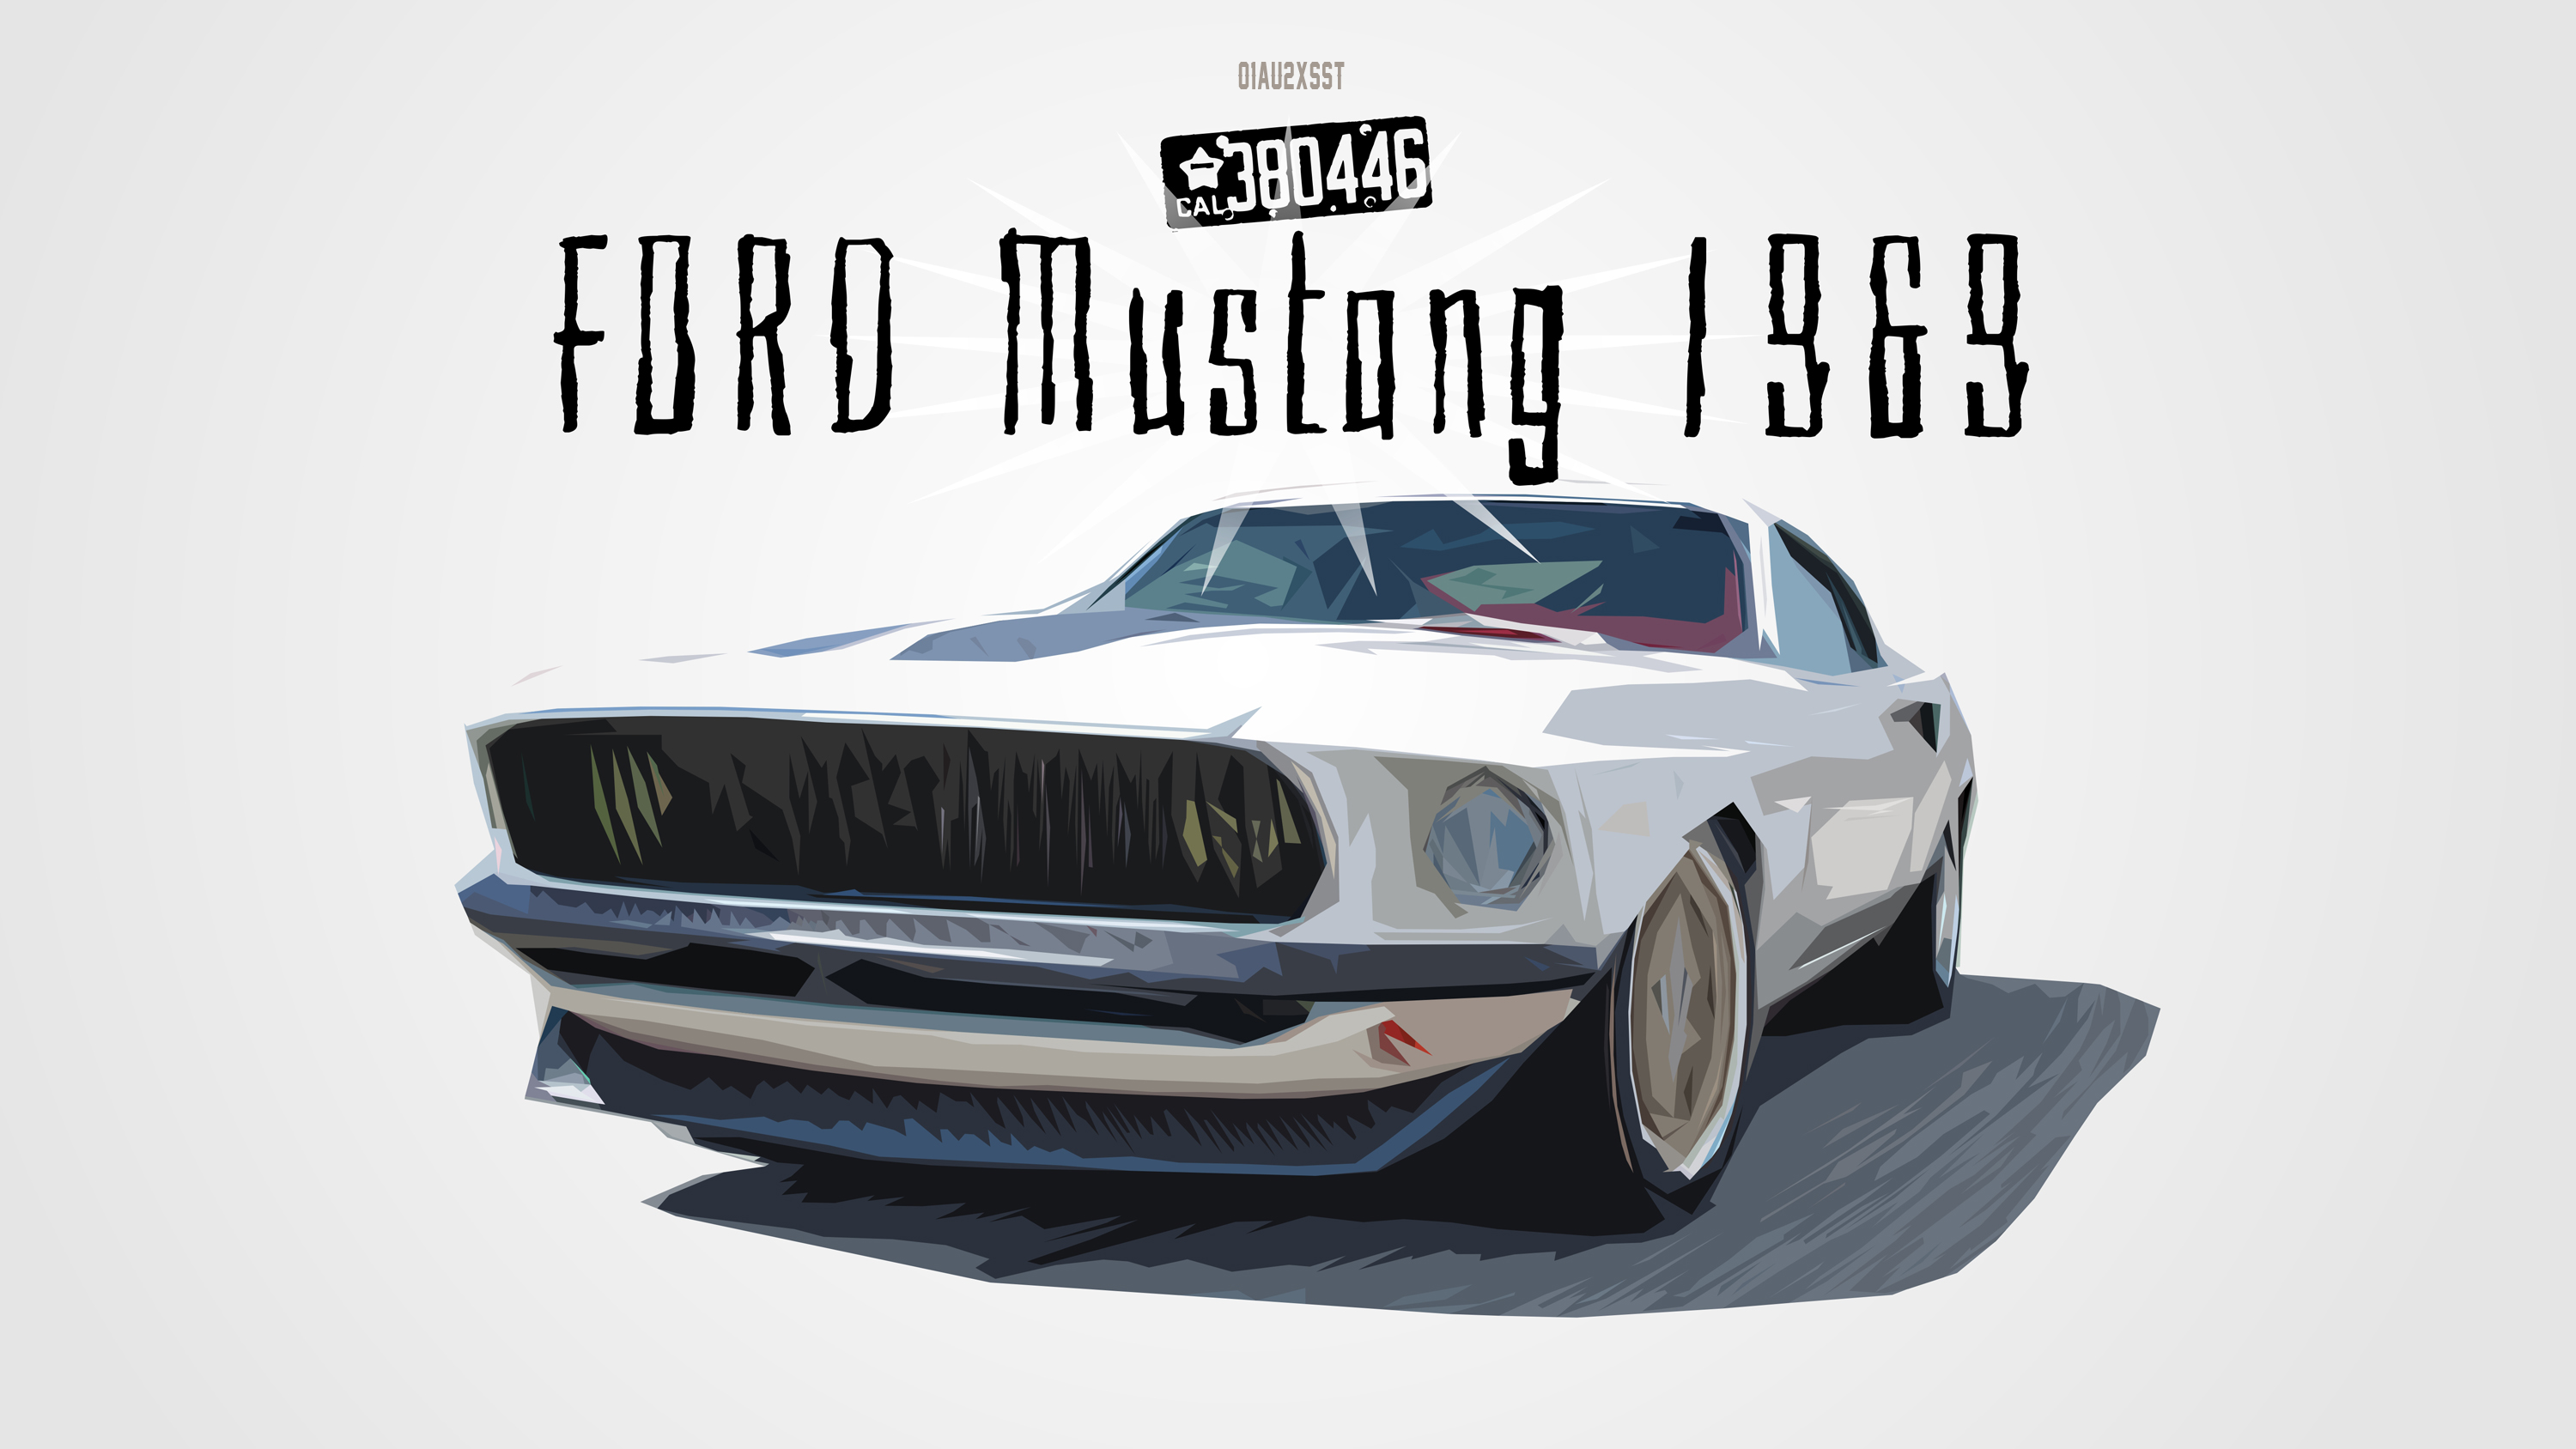 vector, ford, ford mustang, vintage car HD Mobile